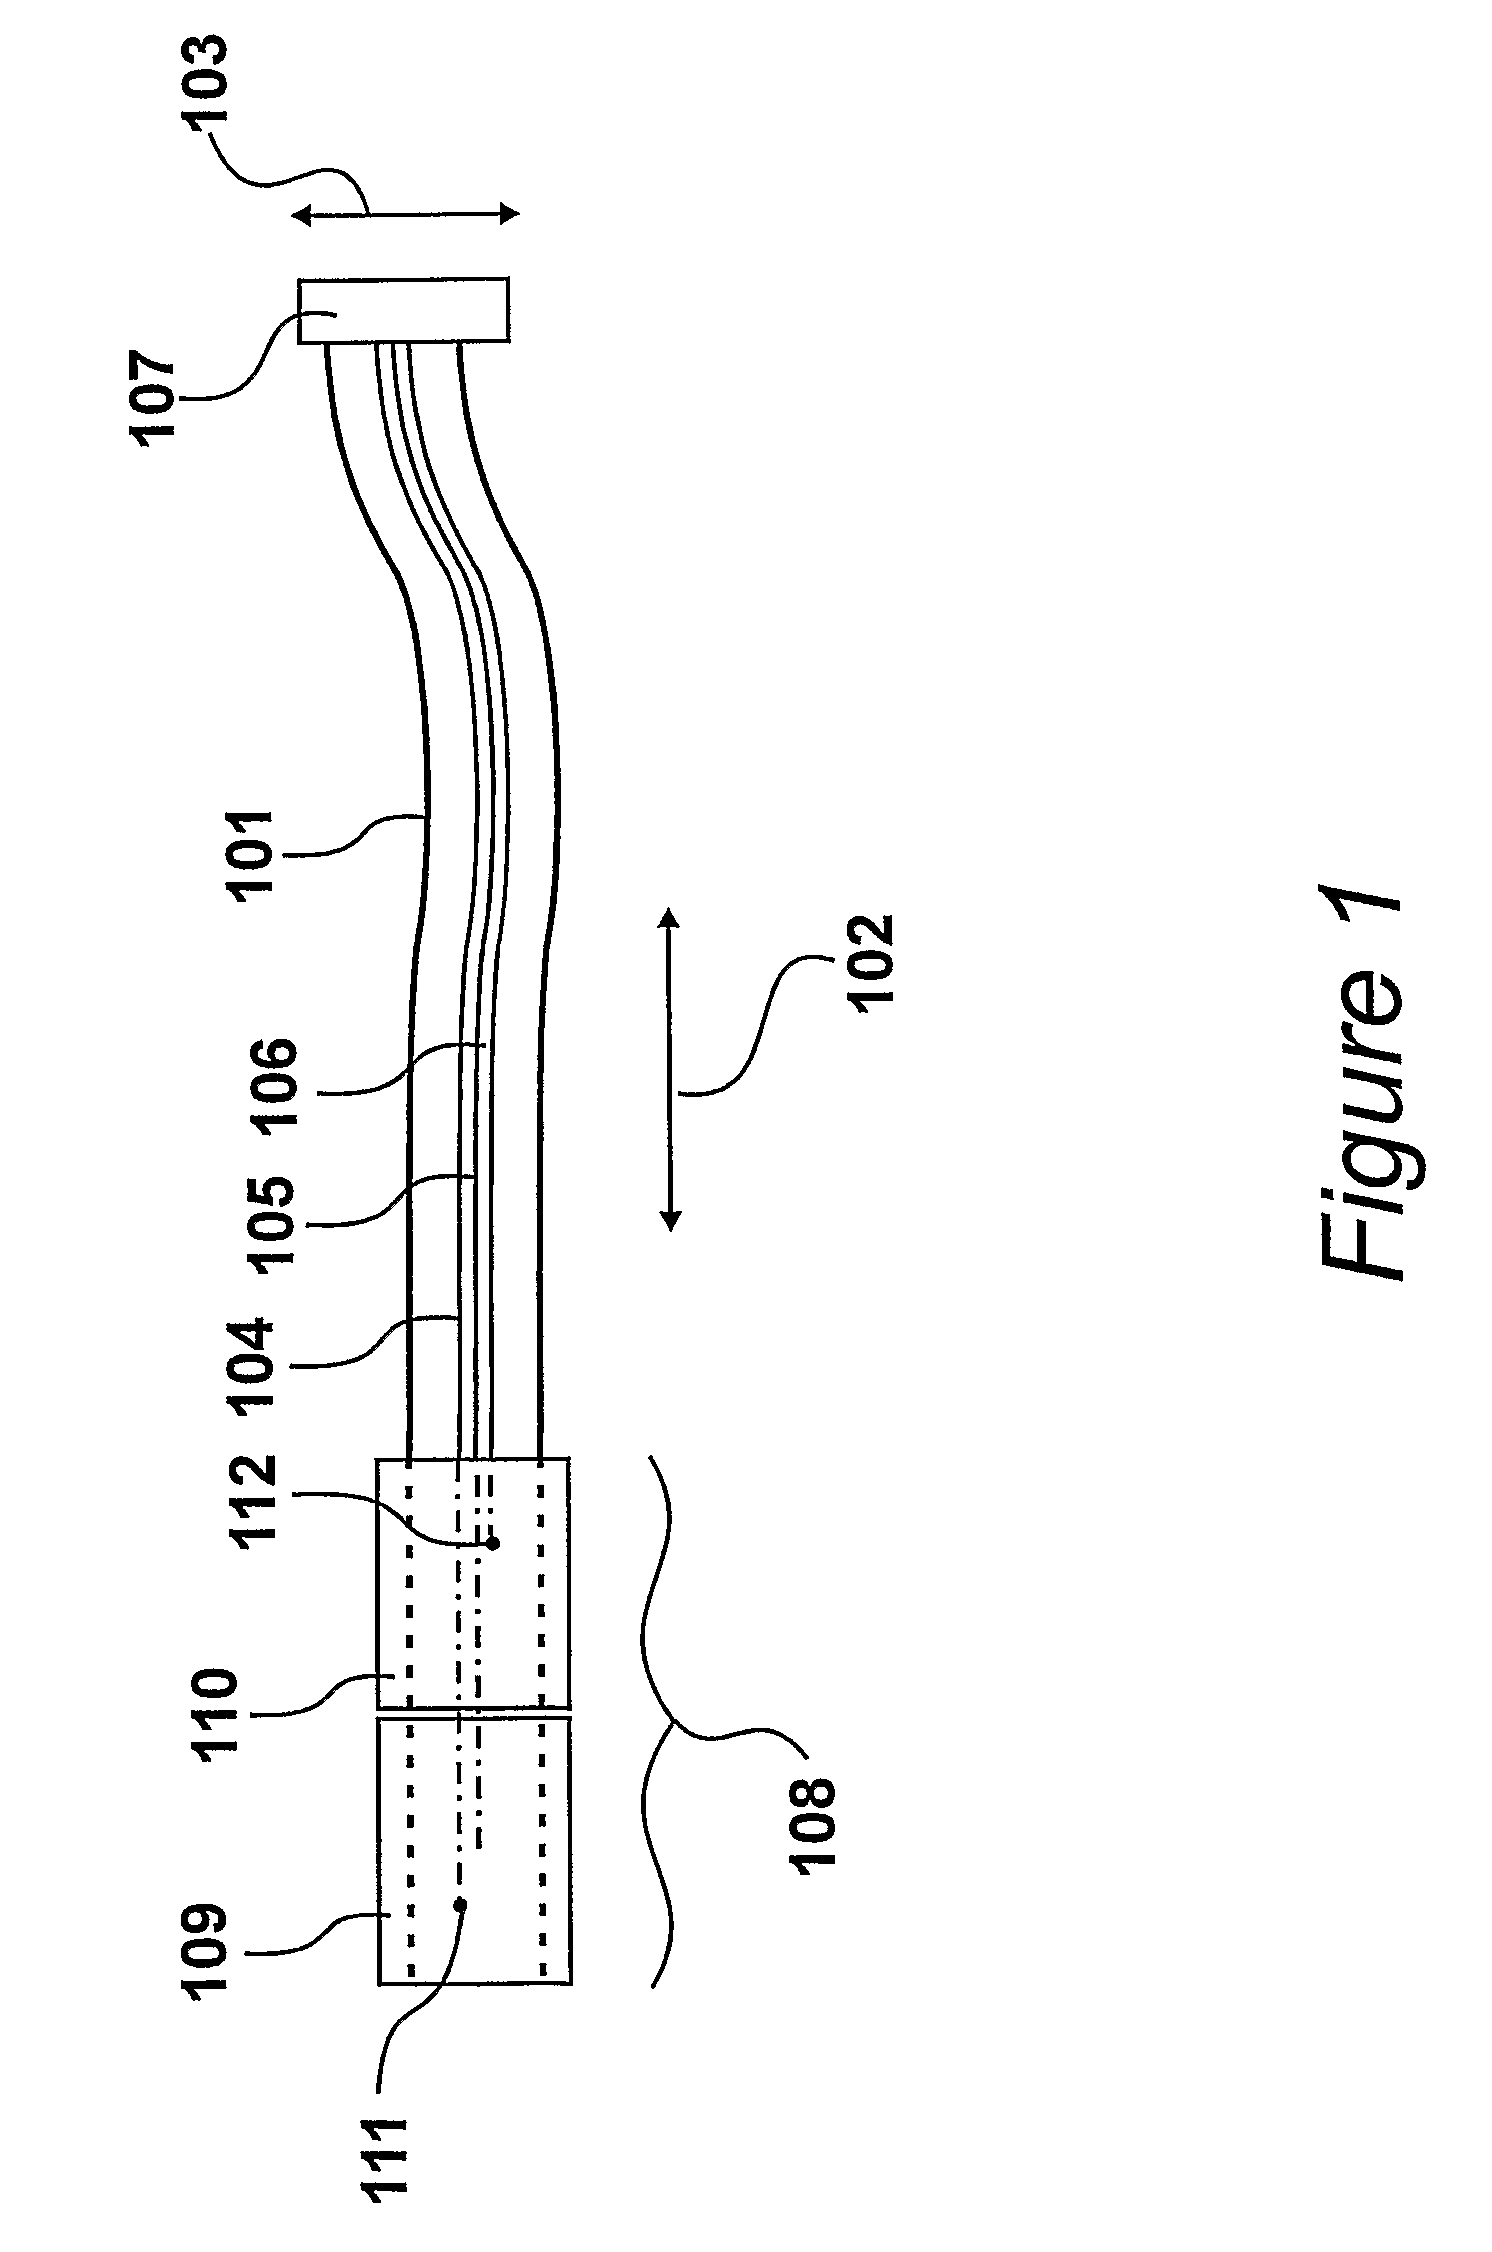 Woven manually operable input device